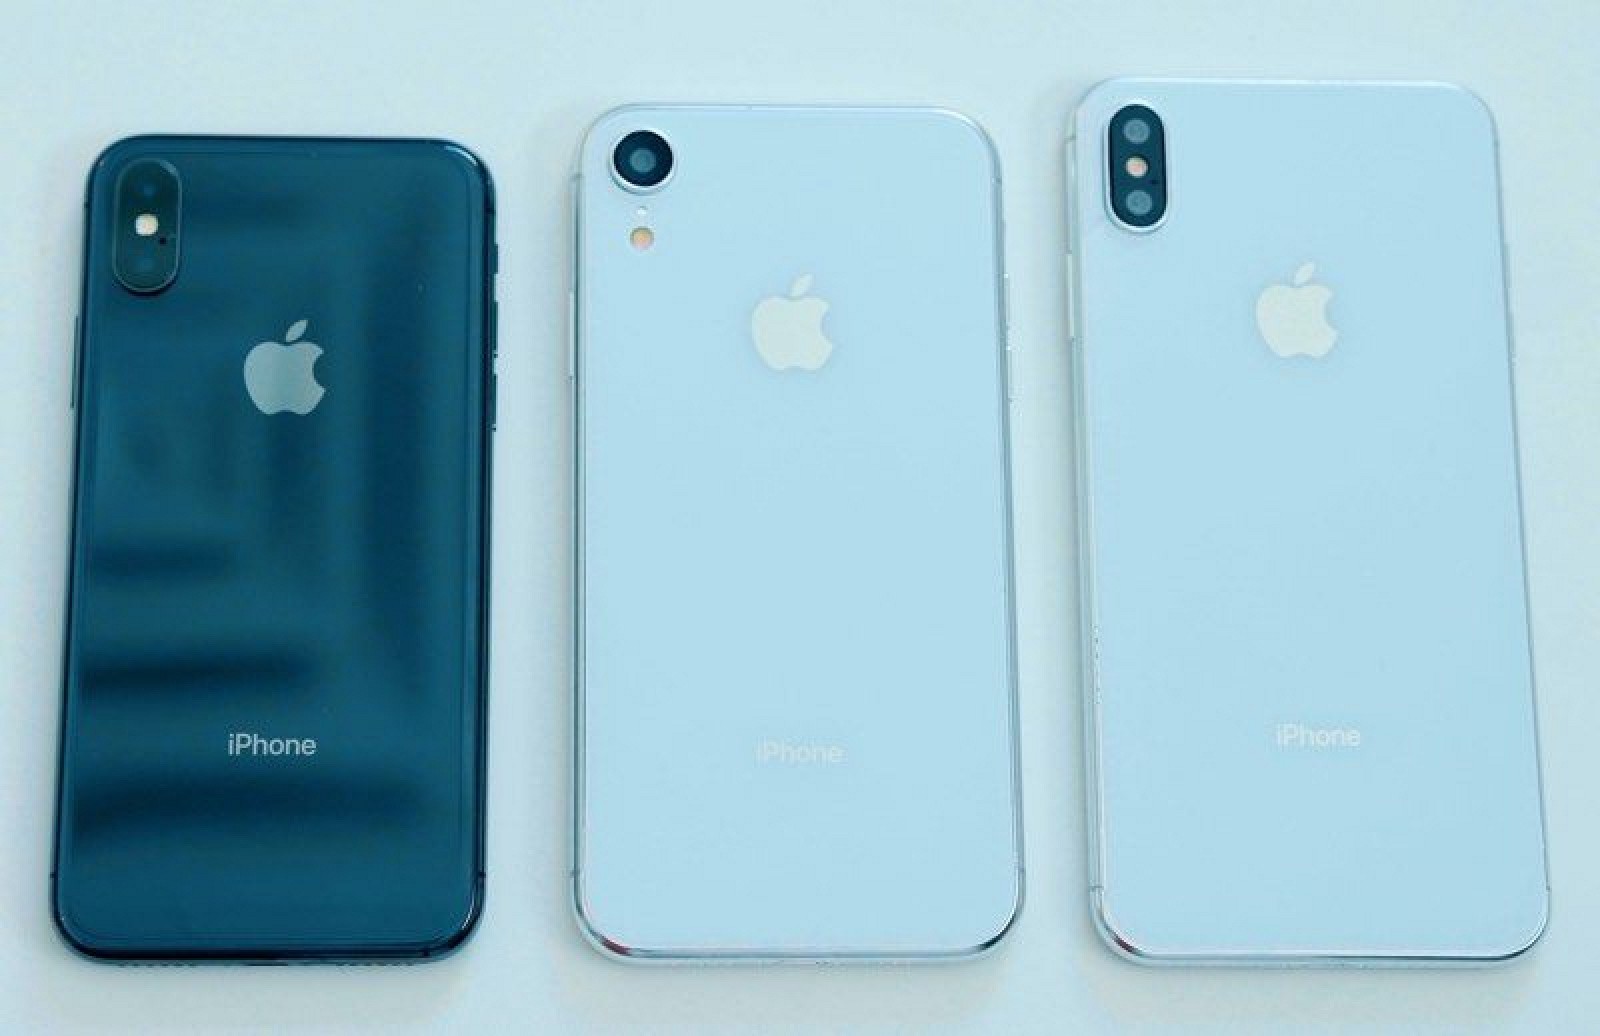 Hands On With 6 1 Inch And 6 5 Inch 2018 Iphone Dummy Models